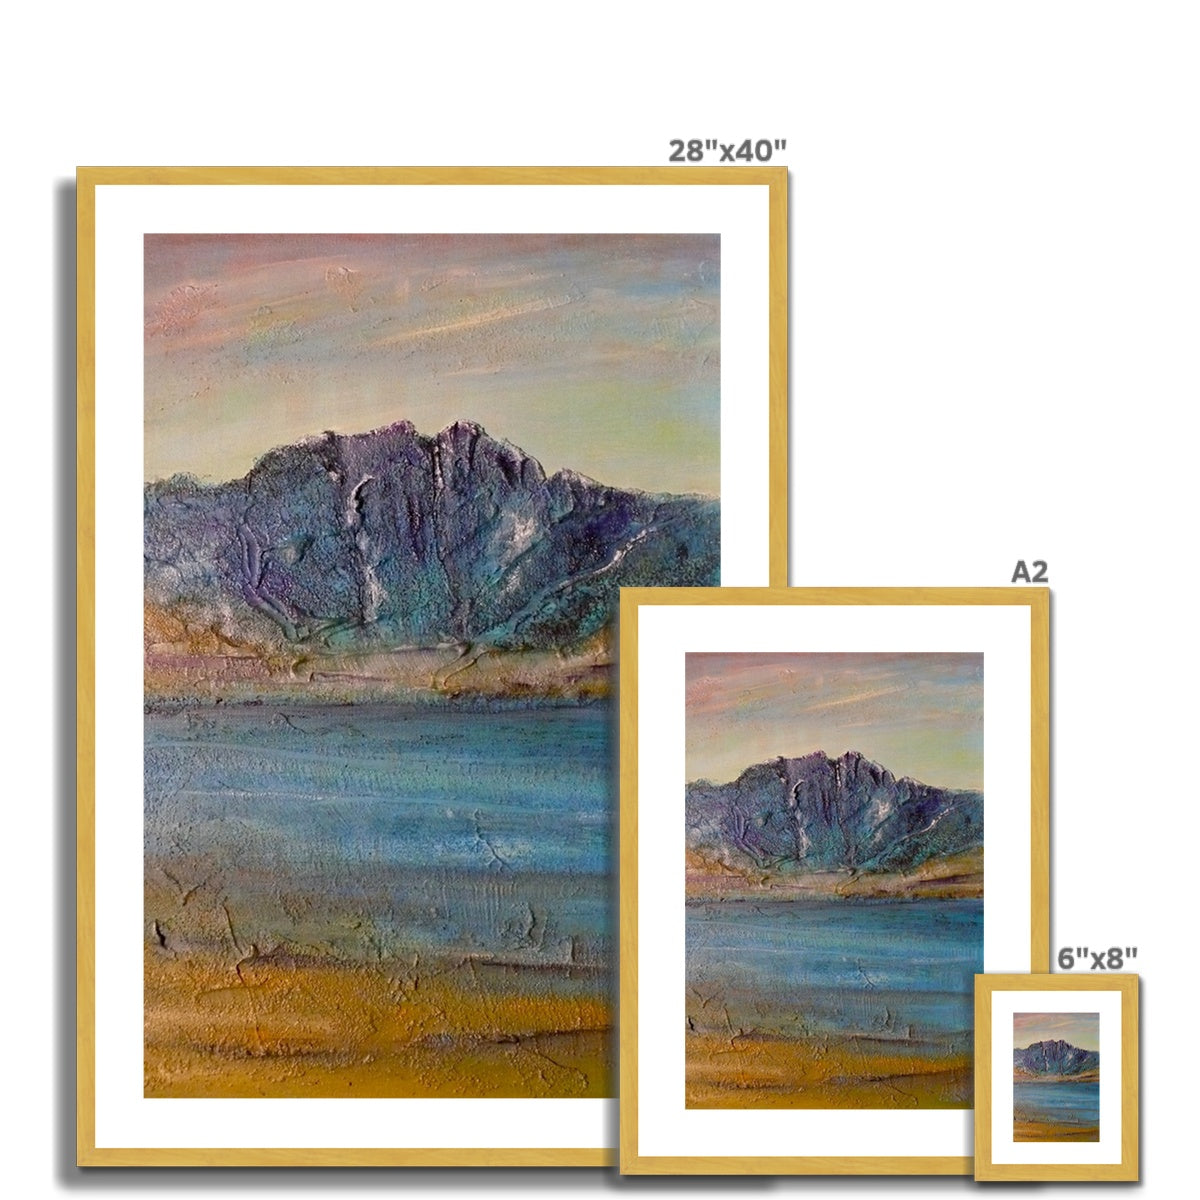 Torridon Painting | Antique Framed & Mounted Prints From Scotland-Antique Framed & Mounted Prints-Scottish Lochs & Mountains Art Gallery-Paintings, Prints, Homeware, Art Gifts From Scotland By Scottish Artist Kevin Hunter